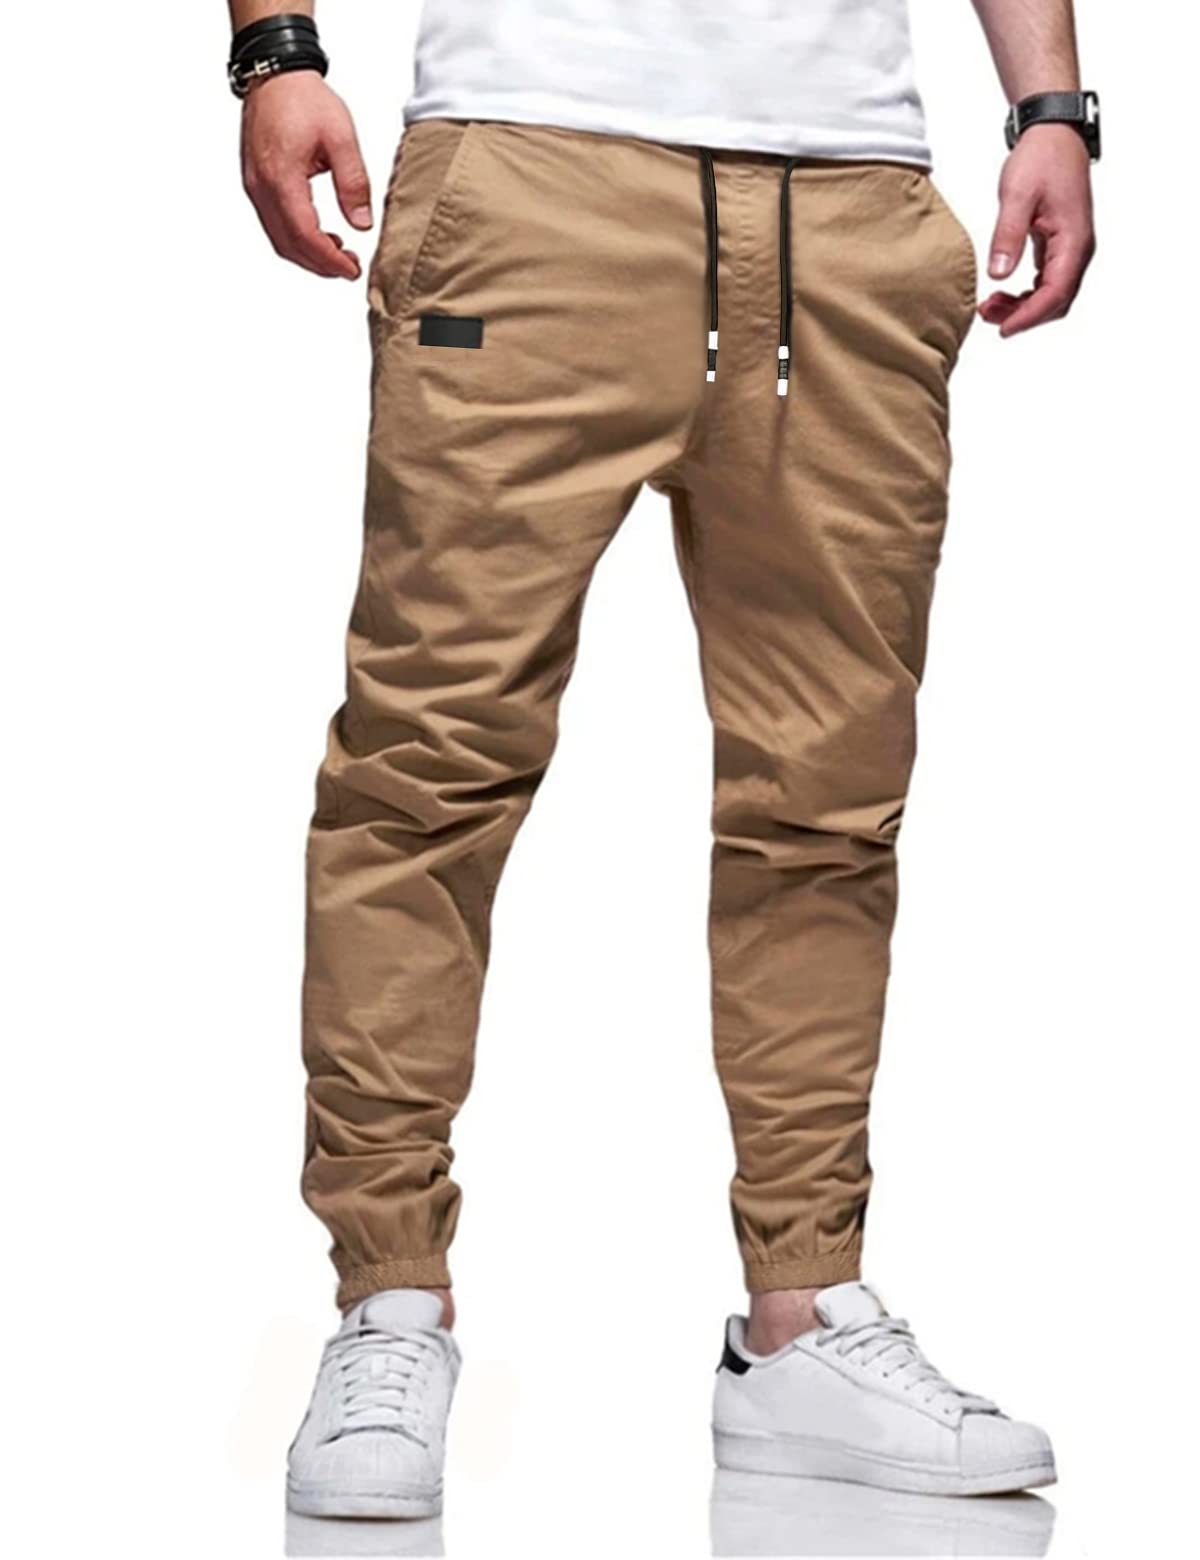 Bilitry Men Joggers Chino Cargo Pants Hiking Outdoor Recreation Pants Twill Fitness Track Jogging Pants Casual Cotton Pants